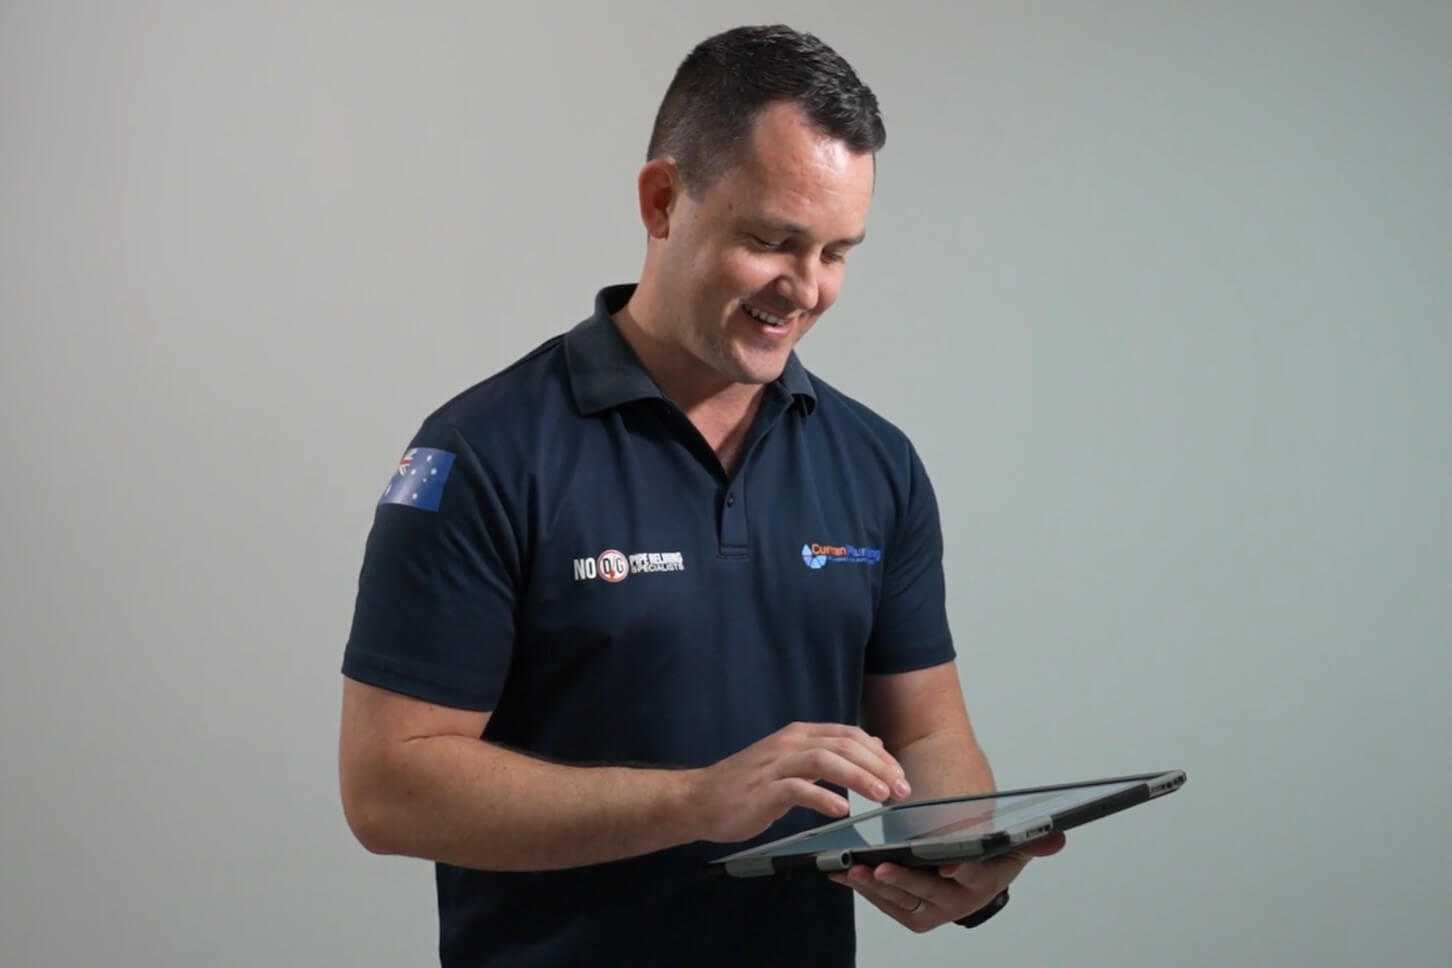 Plumber wearing navy top looking at FlatRateNOW on a tablet